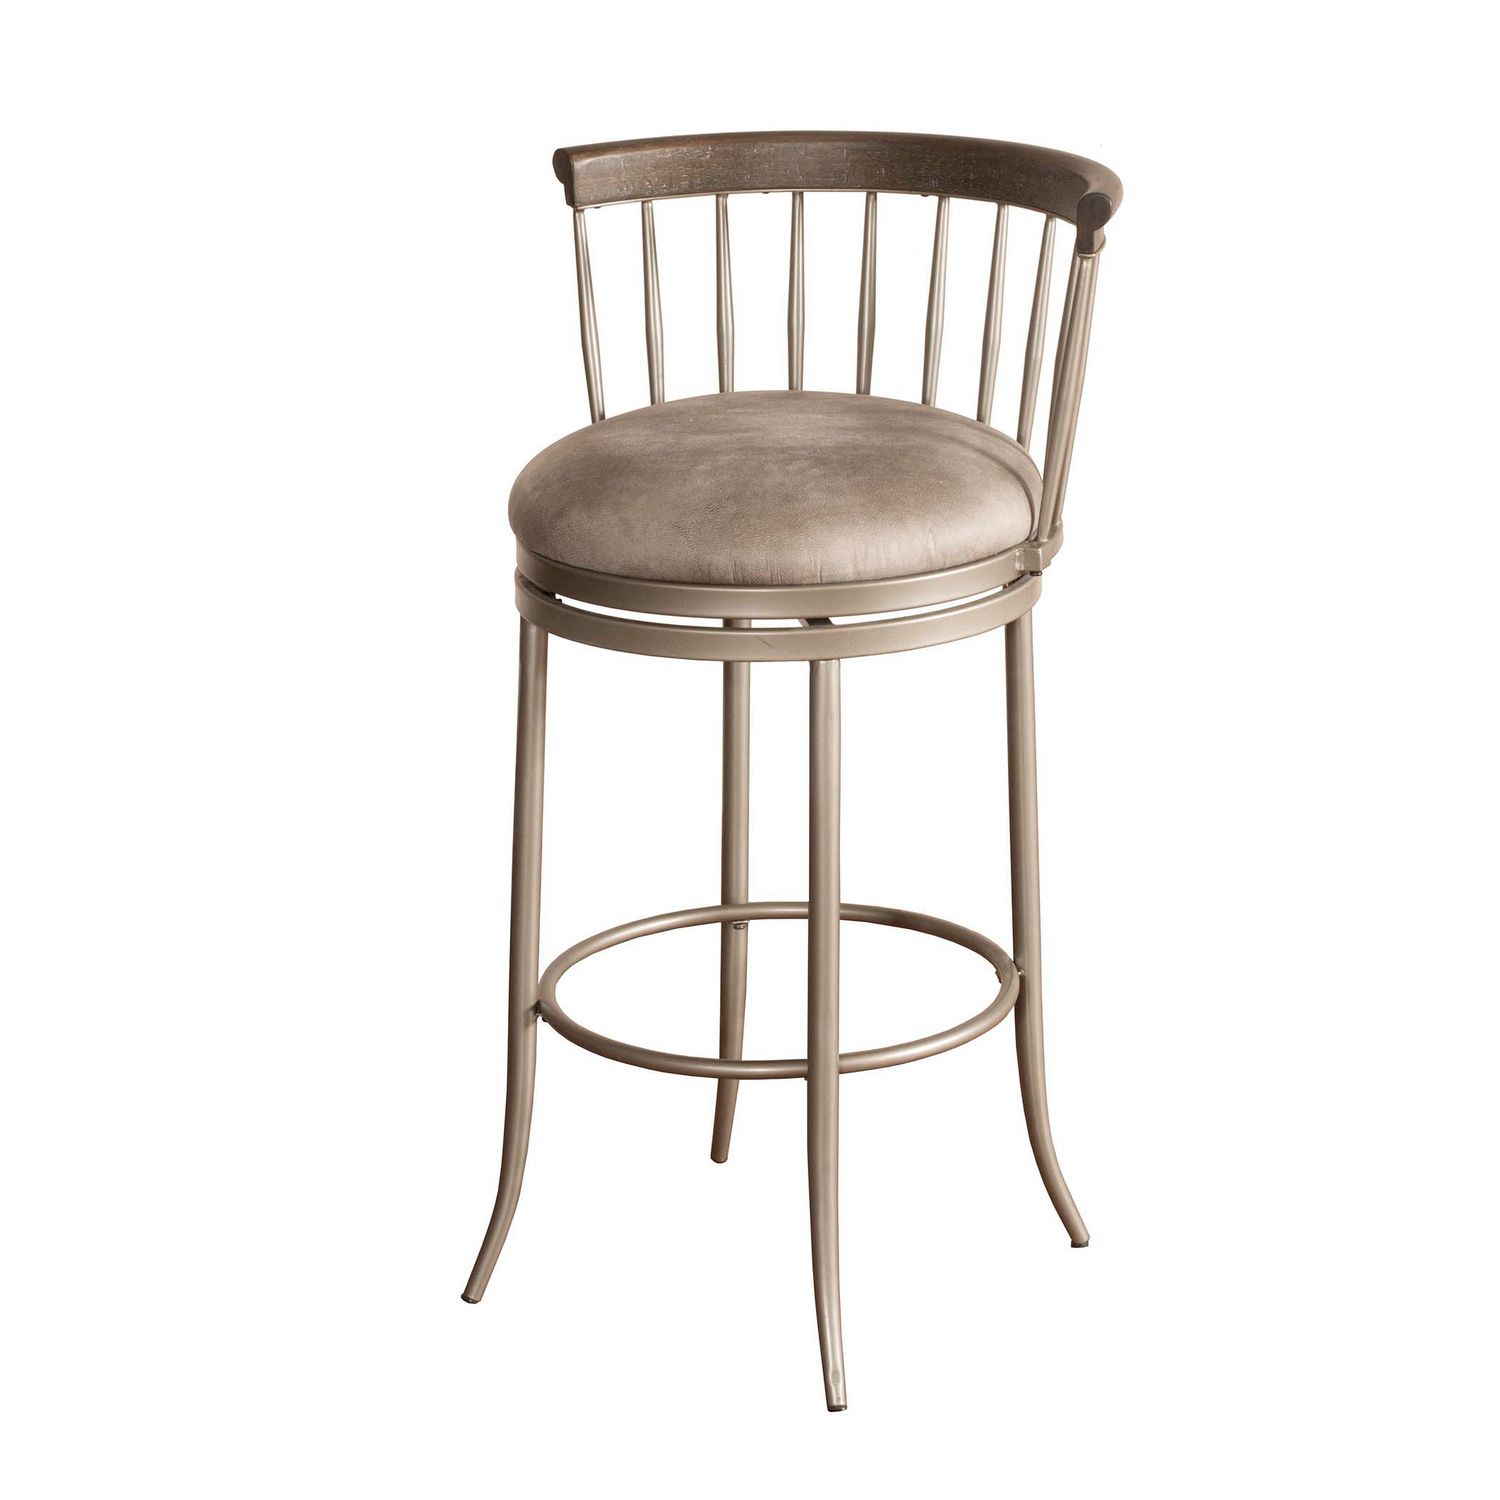 Image for Hillsdale Furniture Cortez Swivel Counter Stool at Kohl's.